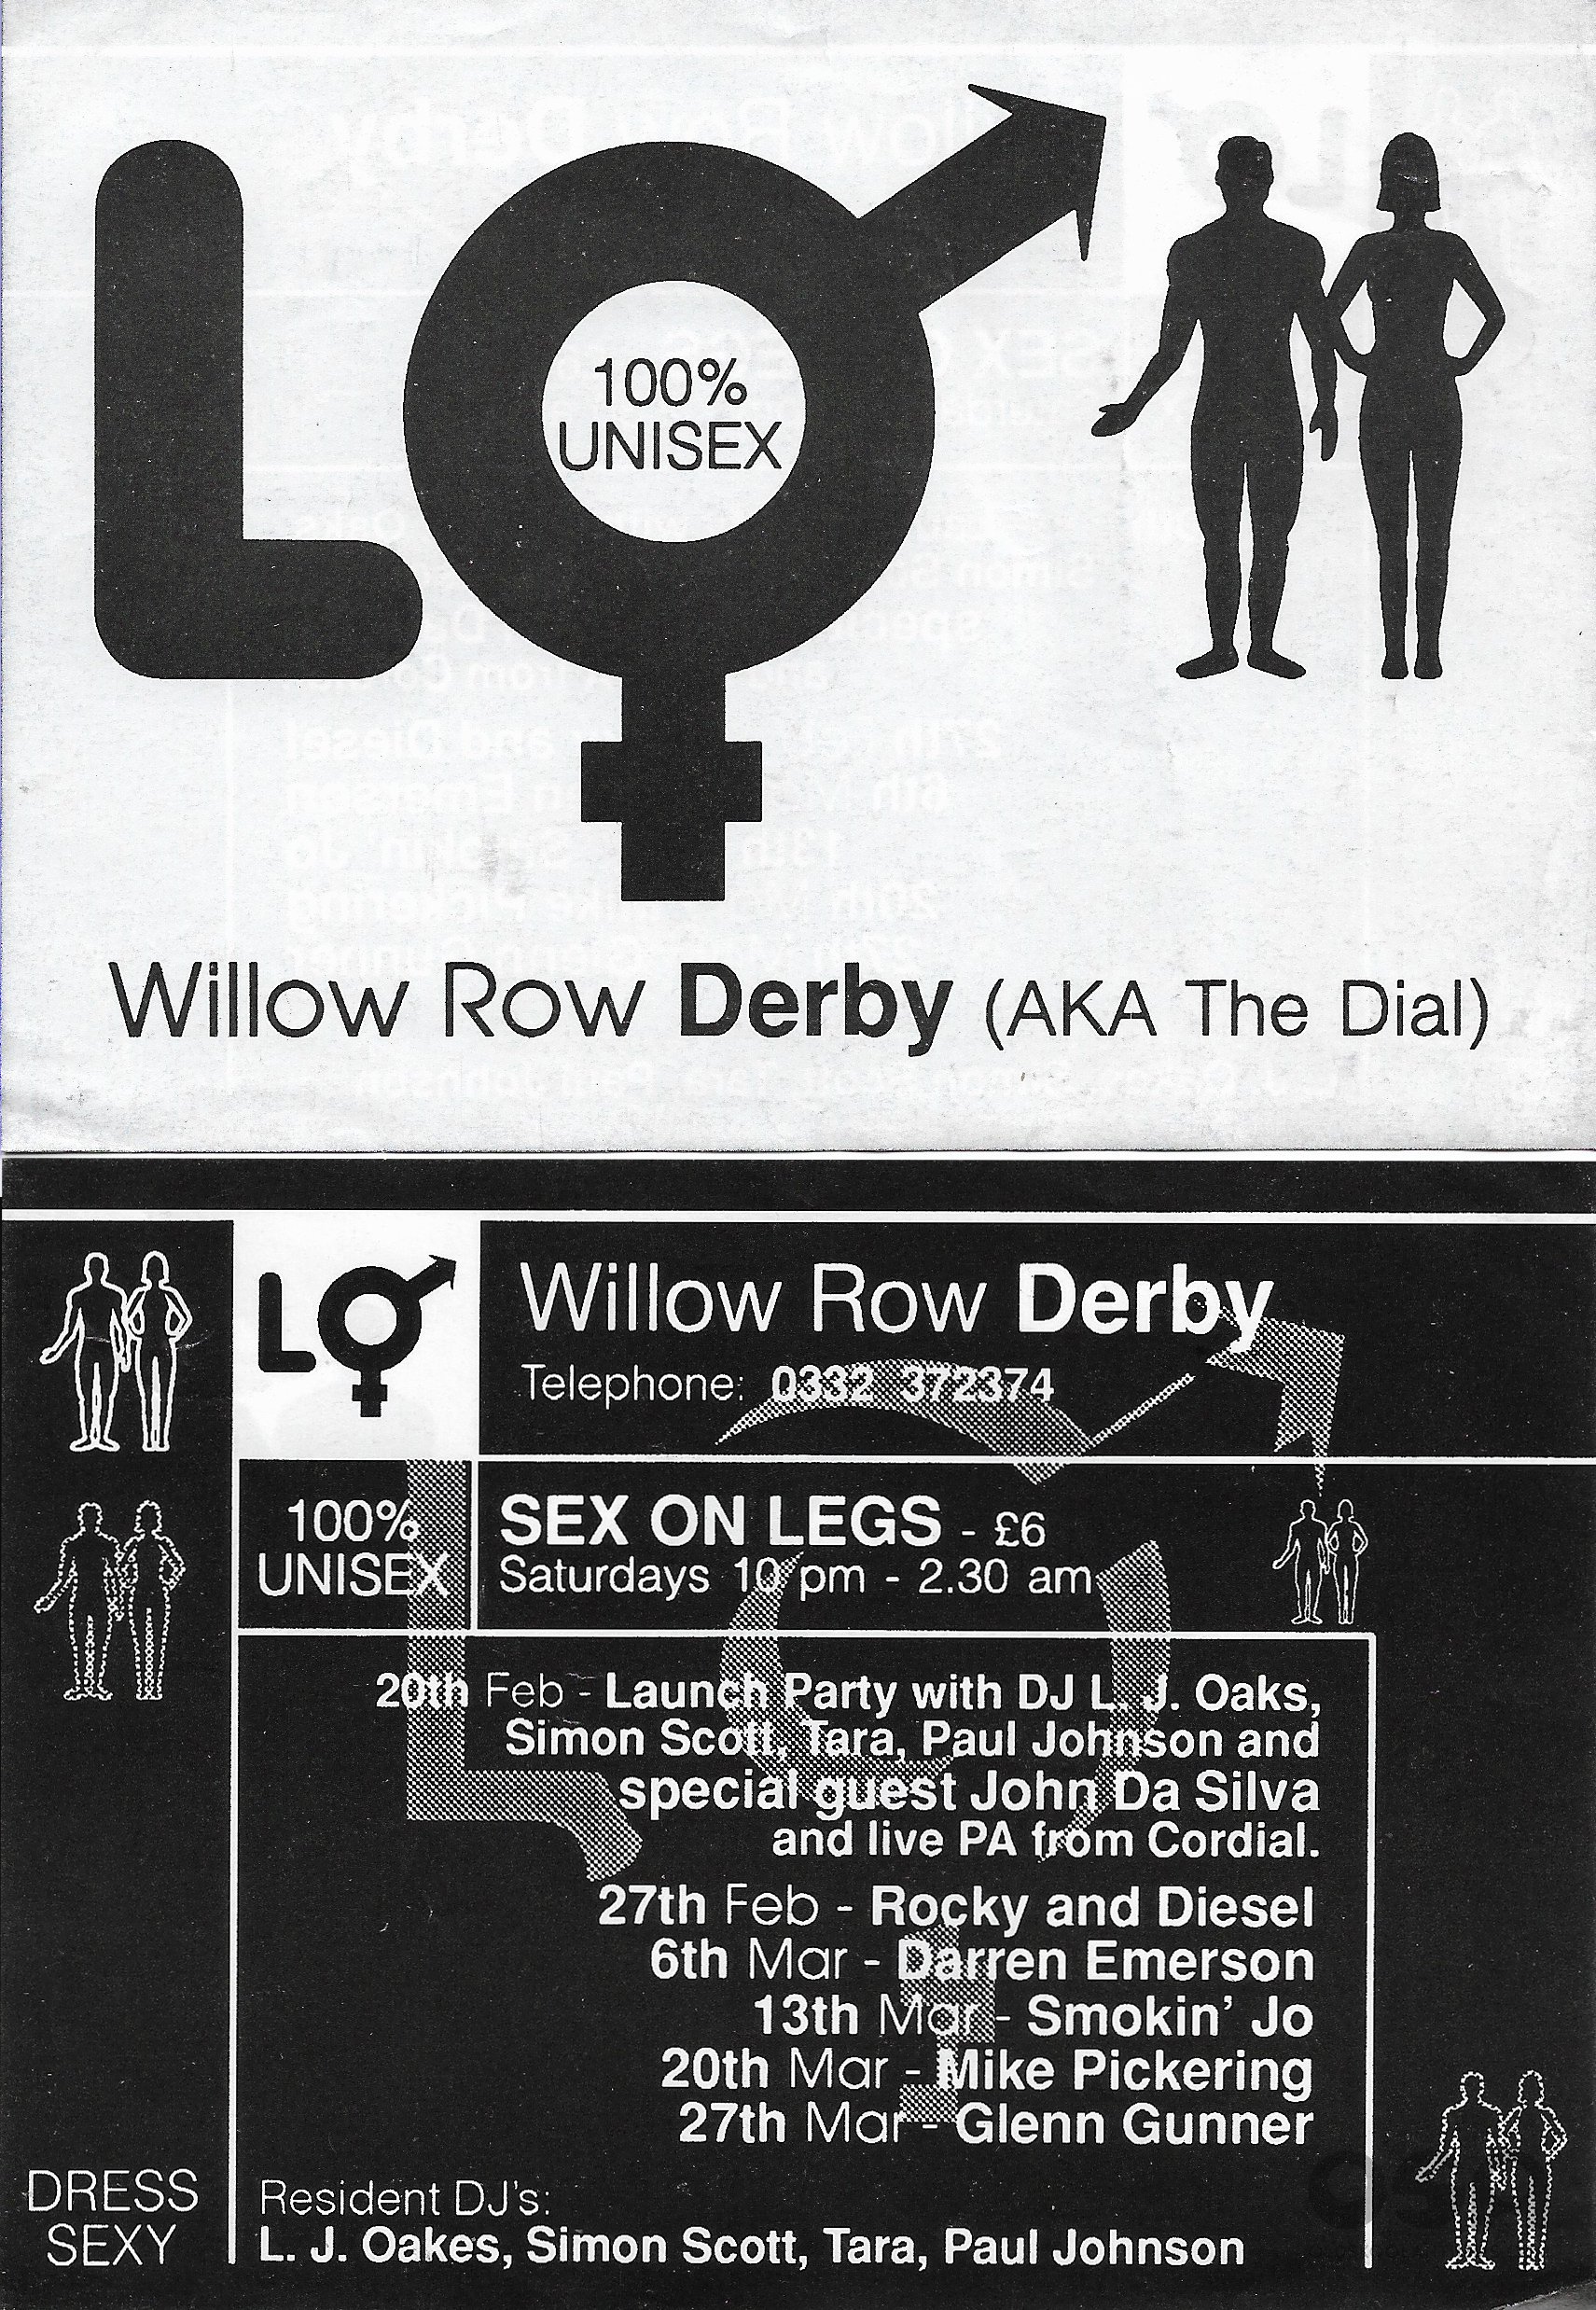 L0 @ The Dial Derby - 20th Feb 199? (Front & Back Of Flyer) .jpg